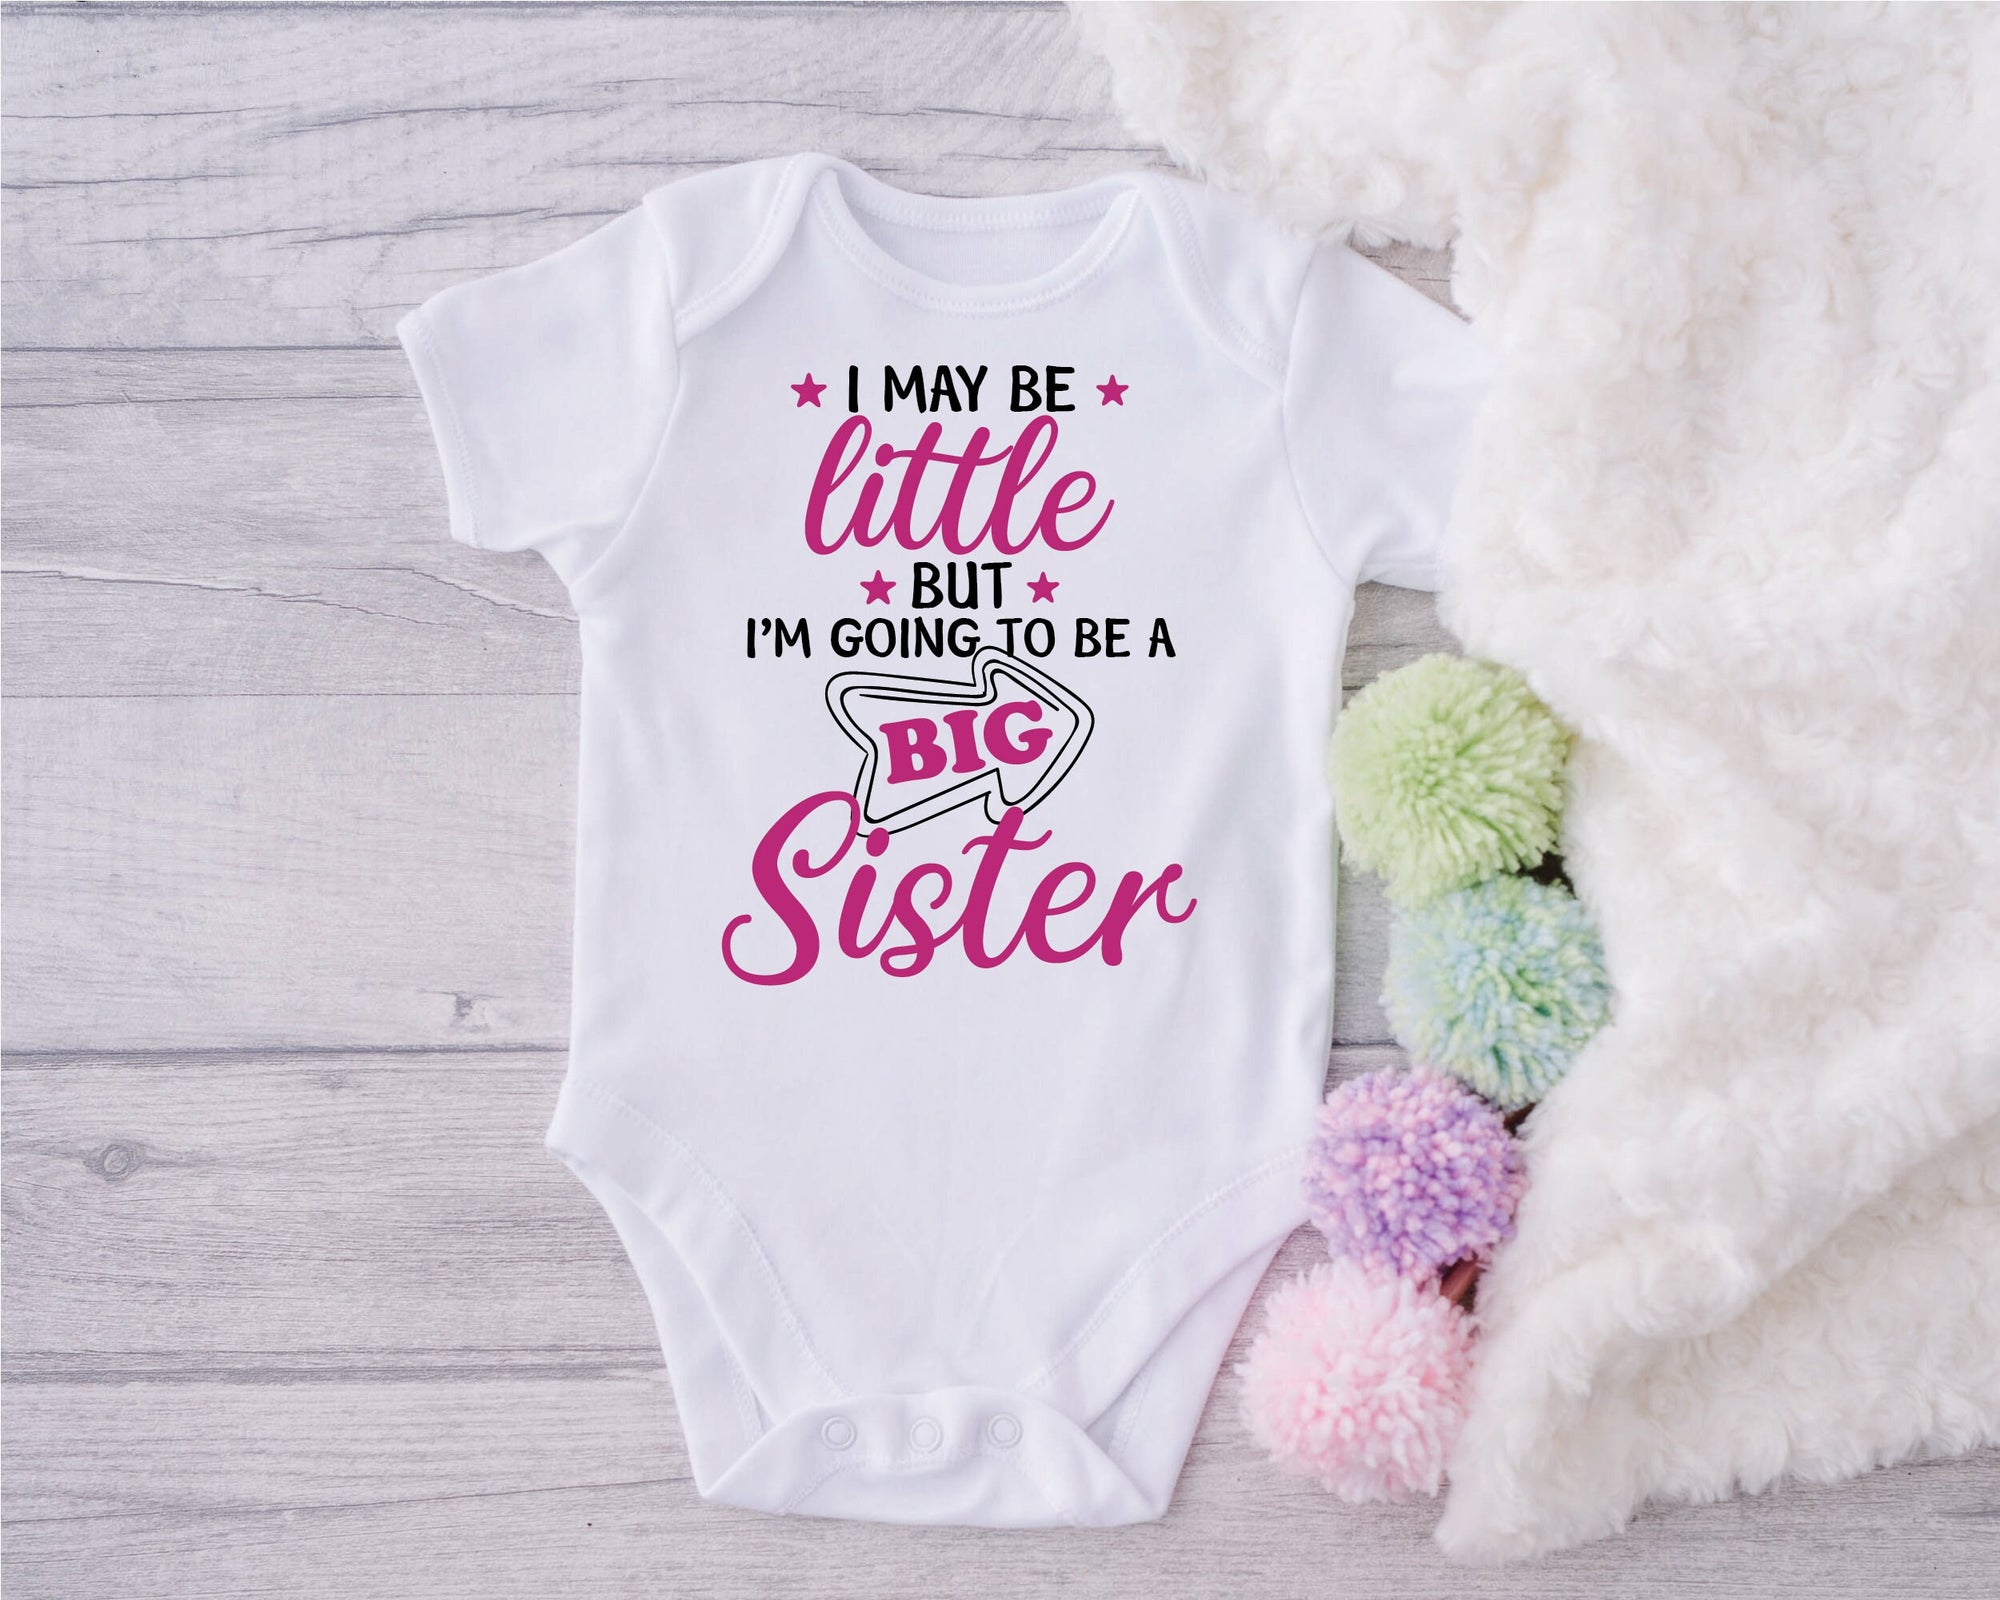 Big Sister Bodysuit, Big Sister T-Shirt, Big Sister Announcement, I May Be Little But I'm Going To Be A Big Sister, Pregnancy Announcement